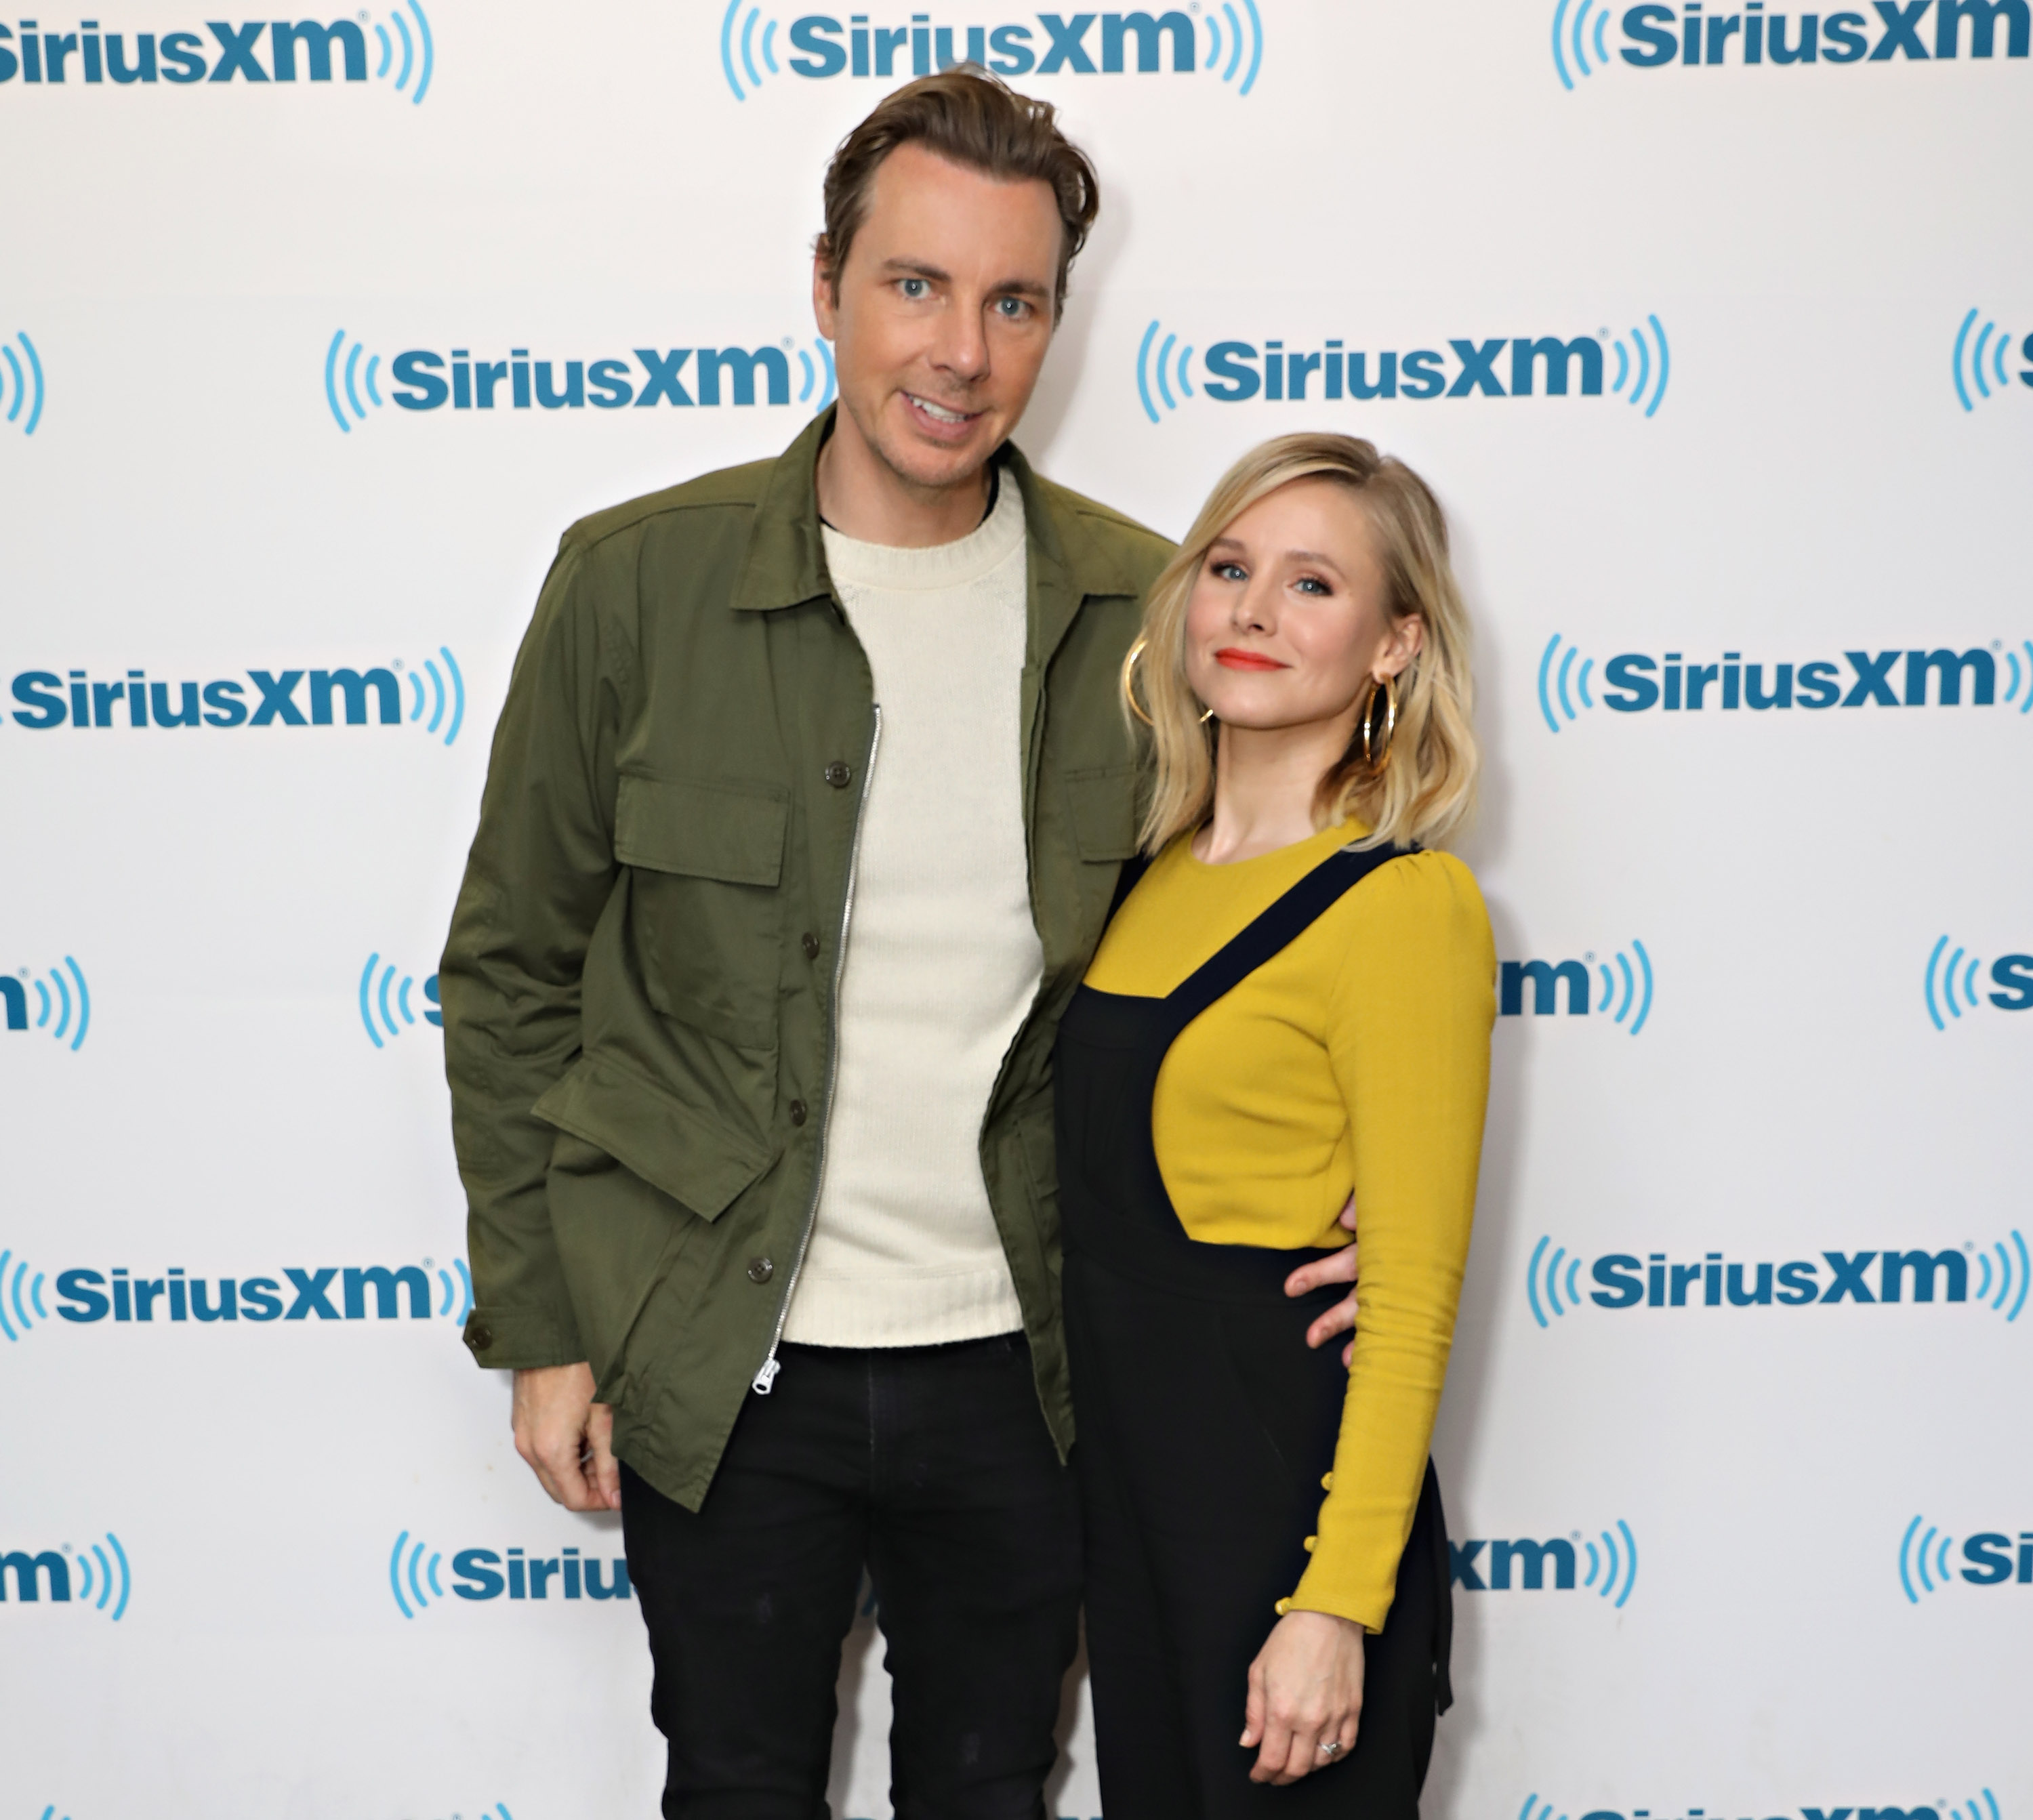 Actors Dax Shepard and Kristen Bell visit the SiriusXM Studios on March 22, 2017 in New York City. (Cindy Ord—Getty Images)